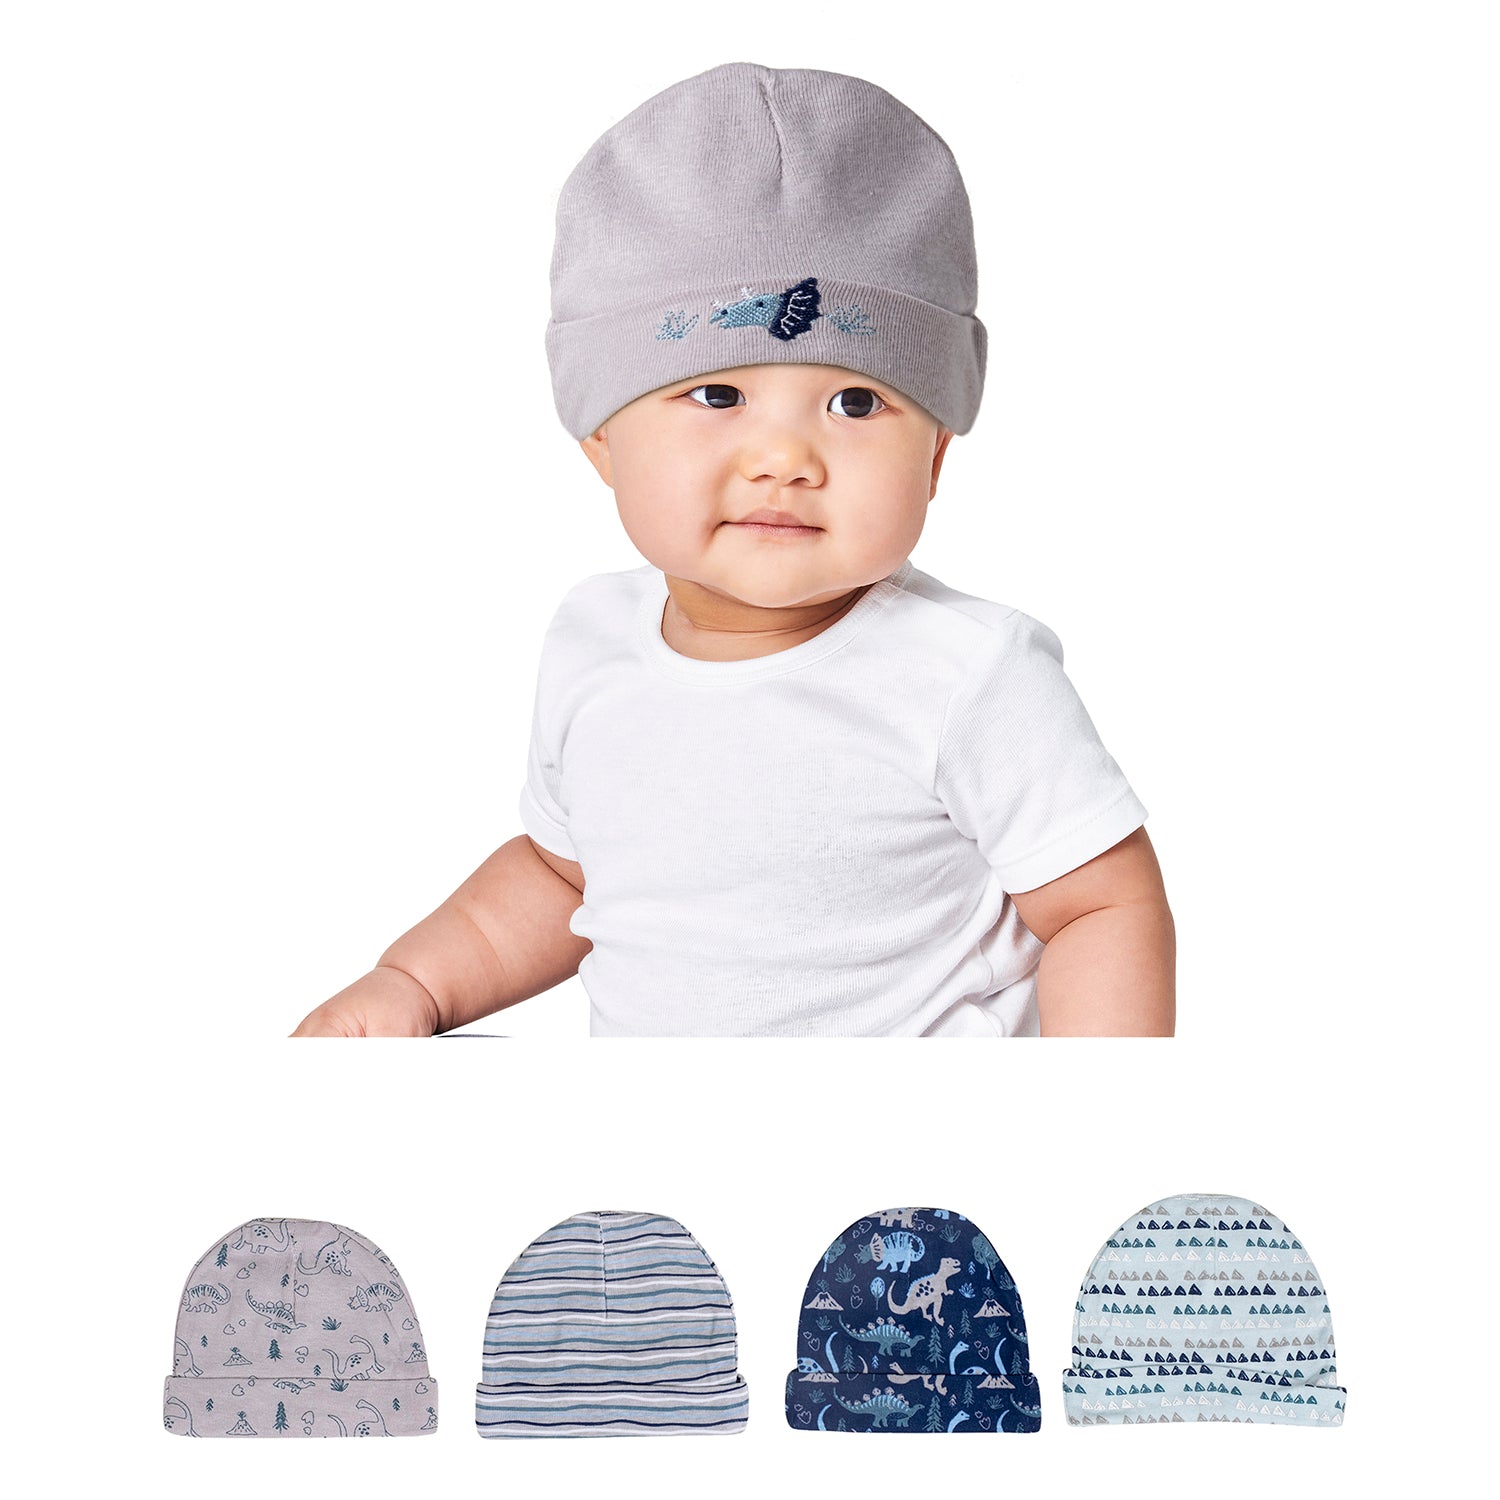 Baby Moo Tiny Trendsetter Infants Ultra Soft 100% Cotton All Season Pack of 5 Caps - Peach